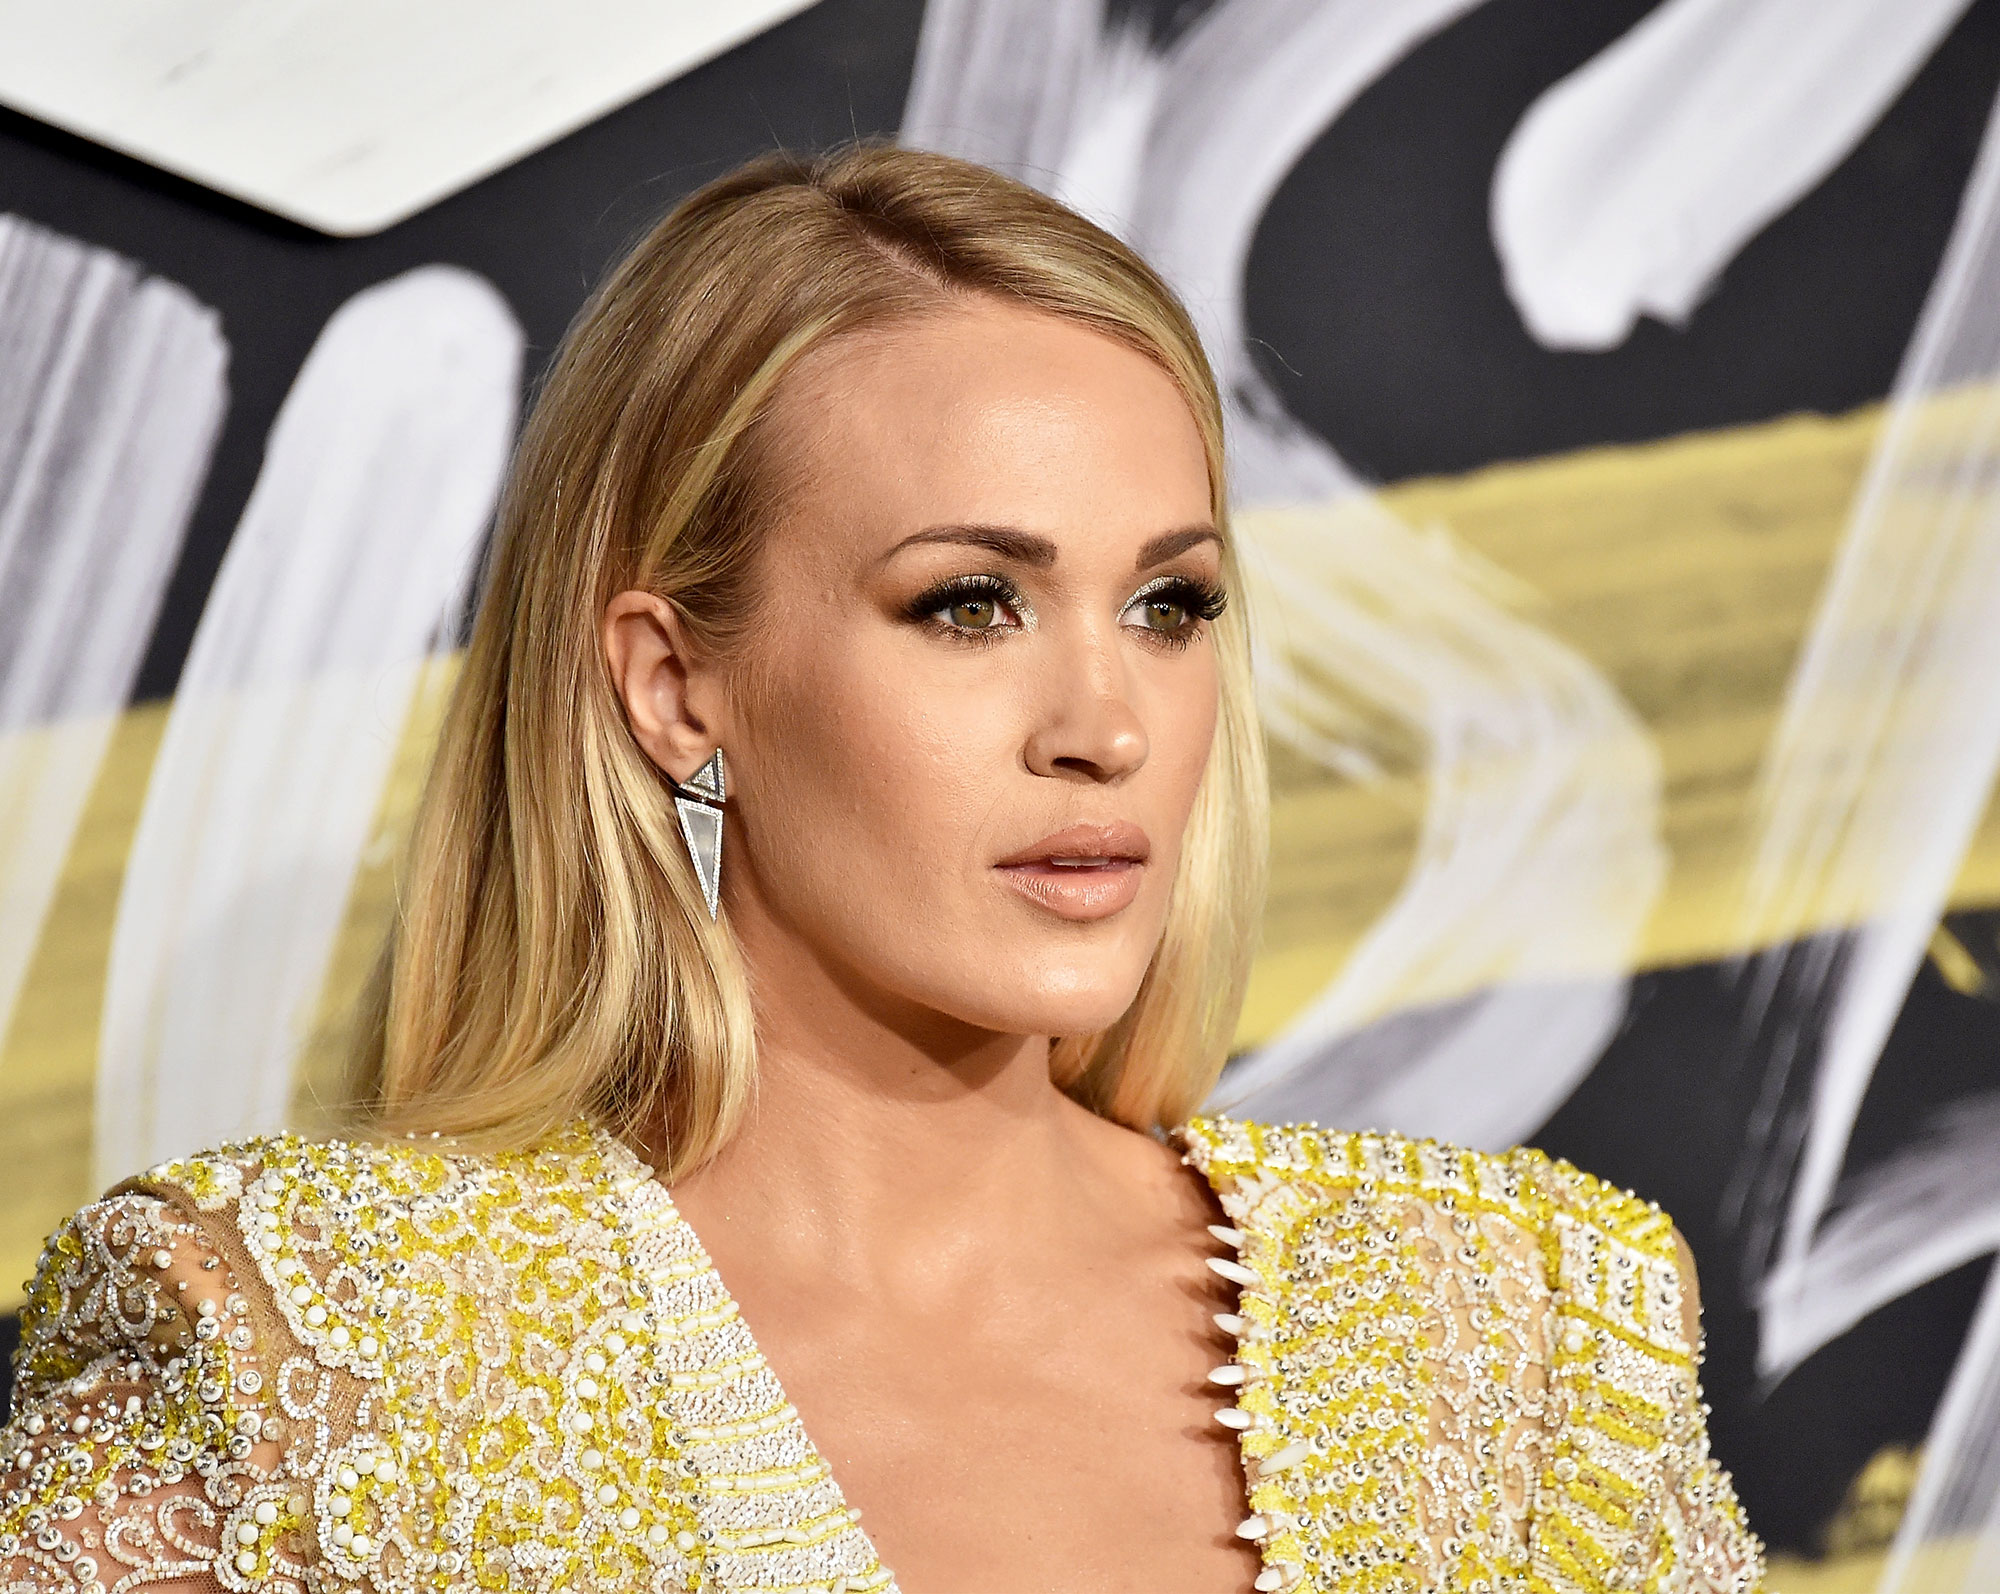 Pregnant Carrie Underwood Cancels Shows ‘Due to Illness’